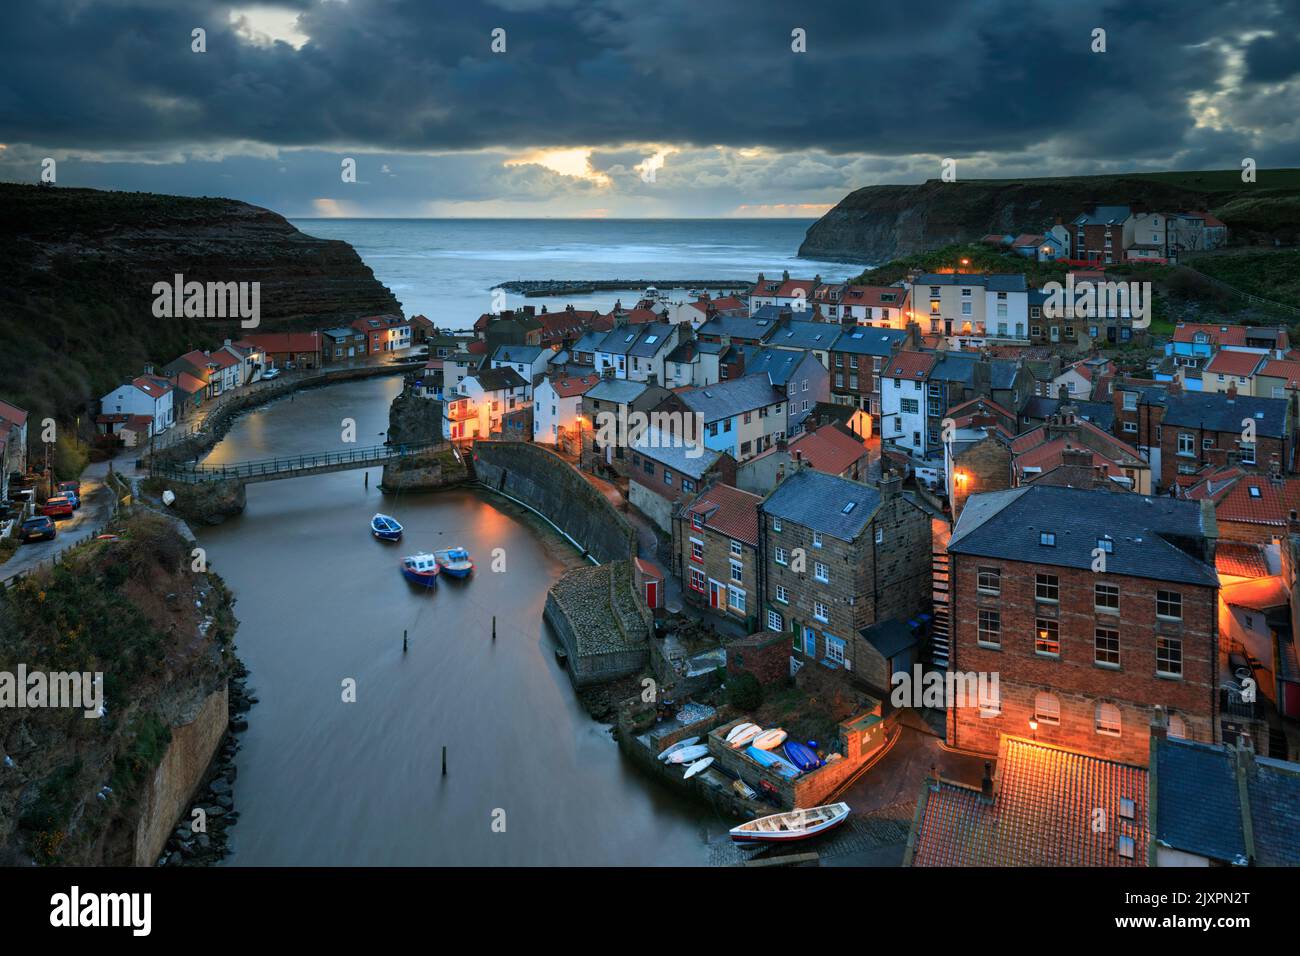 The picturesque village of Staithes on the North Yorkshire Coast captured before sunrise on a stormy morning. Stock Photo